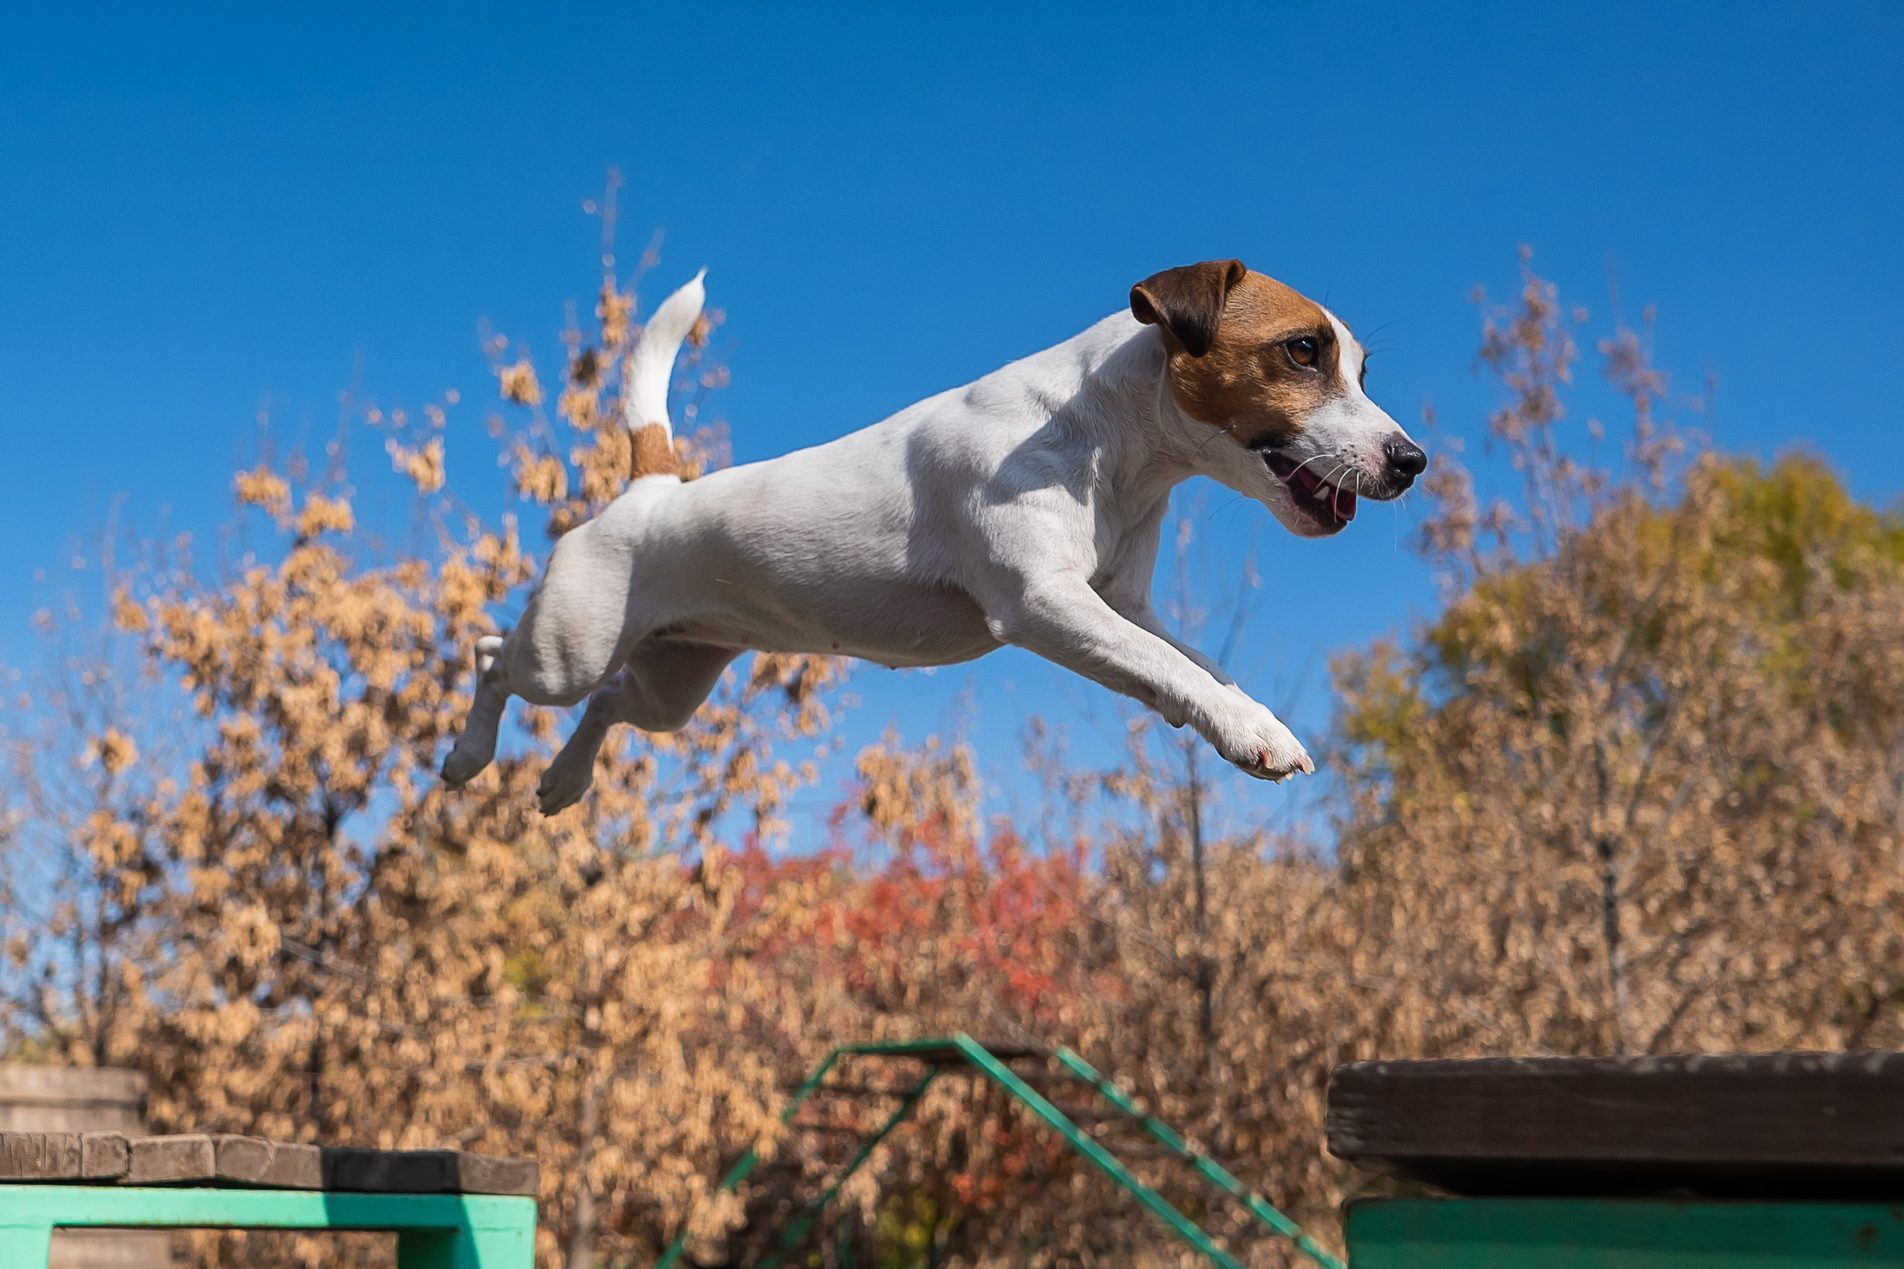 Jack Russell Terrier dog jumping from one wooden bench to another in the dog playground.